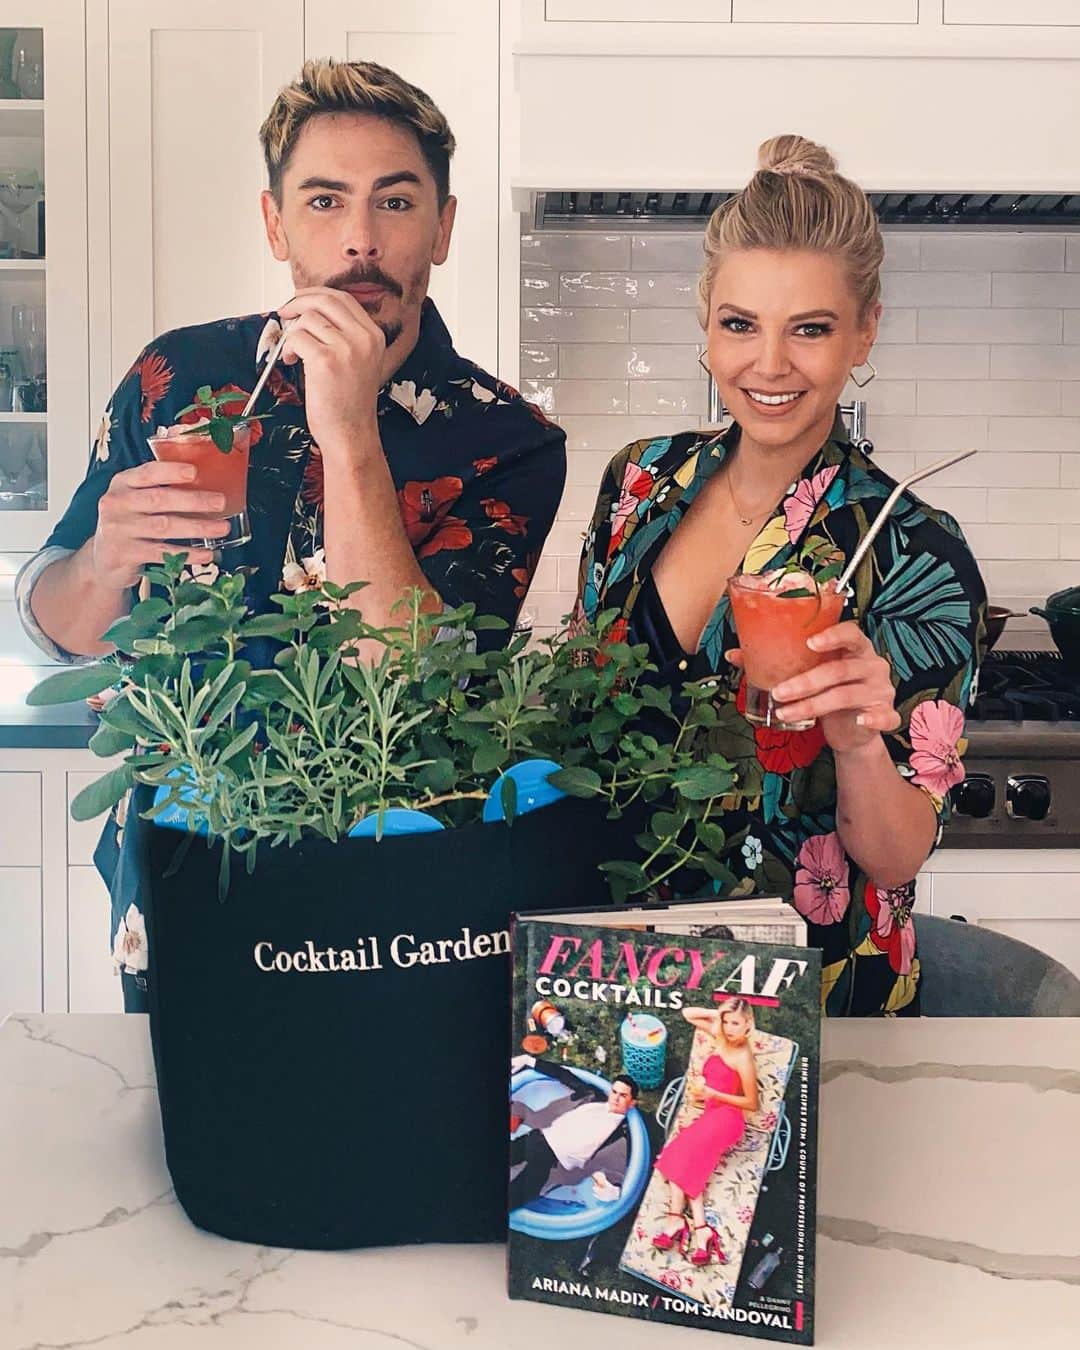 アリアナ・マディックスのインスタグラム：「A FANCY AF GIVEAWAY 🌱🍸 ! Congratulations to  @nicolexcampbell_ on your win!!! 🌱🍸 I learned about @Gardenuity in September, and once I saw their Cocktail Garden, I knew @tomsandoval1 and I had to have it! It has been so fun to experiment with new herbs and simple syrups in our cocktails while we've been spending more time at home. I'm also proud to say that after two months, our garden is still THRIVING 🌿☀️  —  @tomsandoval1 and I can’t believe we’re coming up on the one year anniversary of #FancyAfCocktails  and we can’t think of a better way to celebrate this milestone than with the Fancy AF Cocktail Garden Collection! We'll be Growing for Good because $5 from every purchased garden will be donated to the James Beard Open For Good Foundation to help support restaurants during the COVID-19 Pandemic. You can purchase the Fancy AF Garden Collection via the link in my bio. —  @tomsandoval1 and I will also be going LIVE on Instagram on Thursday, December 3 at 5 PM PST with the @Gardenuity team! We’ll be mixing some of our favorite #fancyafcocktails with fresh herbs and even introducing a new one. We’re so excited and want to make sure you all join us with your new Fancy AF Cocktail Gardens! We're kicking off this fabulous partnership with a Fancy AF Cocktail Garden Giveaway - one lucky winner will receive the complete bundle!  —  Here’s how to enter -  1. Follow me @ariana252525, @tomsandoval1, and @Gardenuity  2. Like + tag three friends on this post who you want to have a #fancyafcocktail with  3. BONUS ENTRY - share the giveaway to your story and tag @Gardenuity!  —  Winner will be picked on 11/28! Good luck!  —  *The giveaway is open only to residents of the Continental US aged 21 years or older. Void where prohibited by law. No purchase necessary to participate. The entry period begins at 8pm PST ON 11/23 and ends at 9PM PST TIME on 11/28.  Winner chosen and contacted within 24 hours of the giveaway end.」